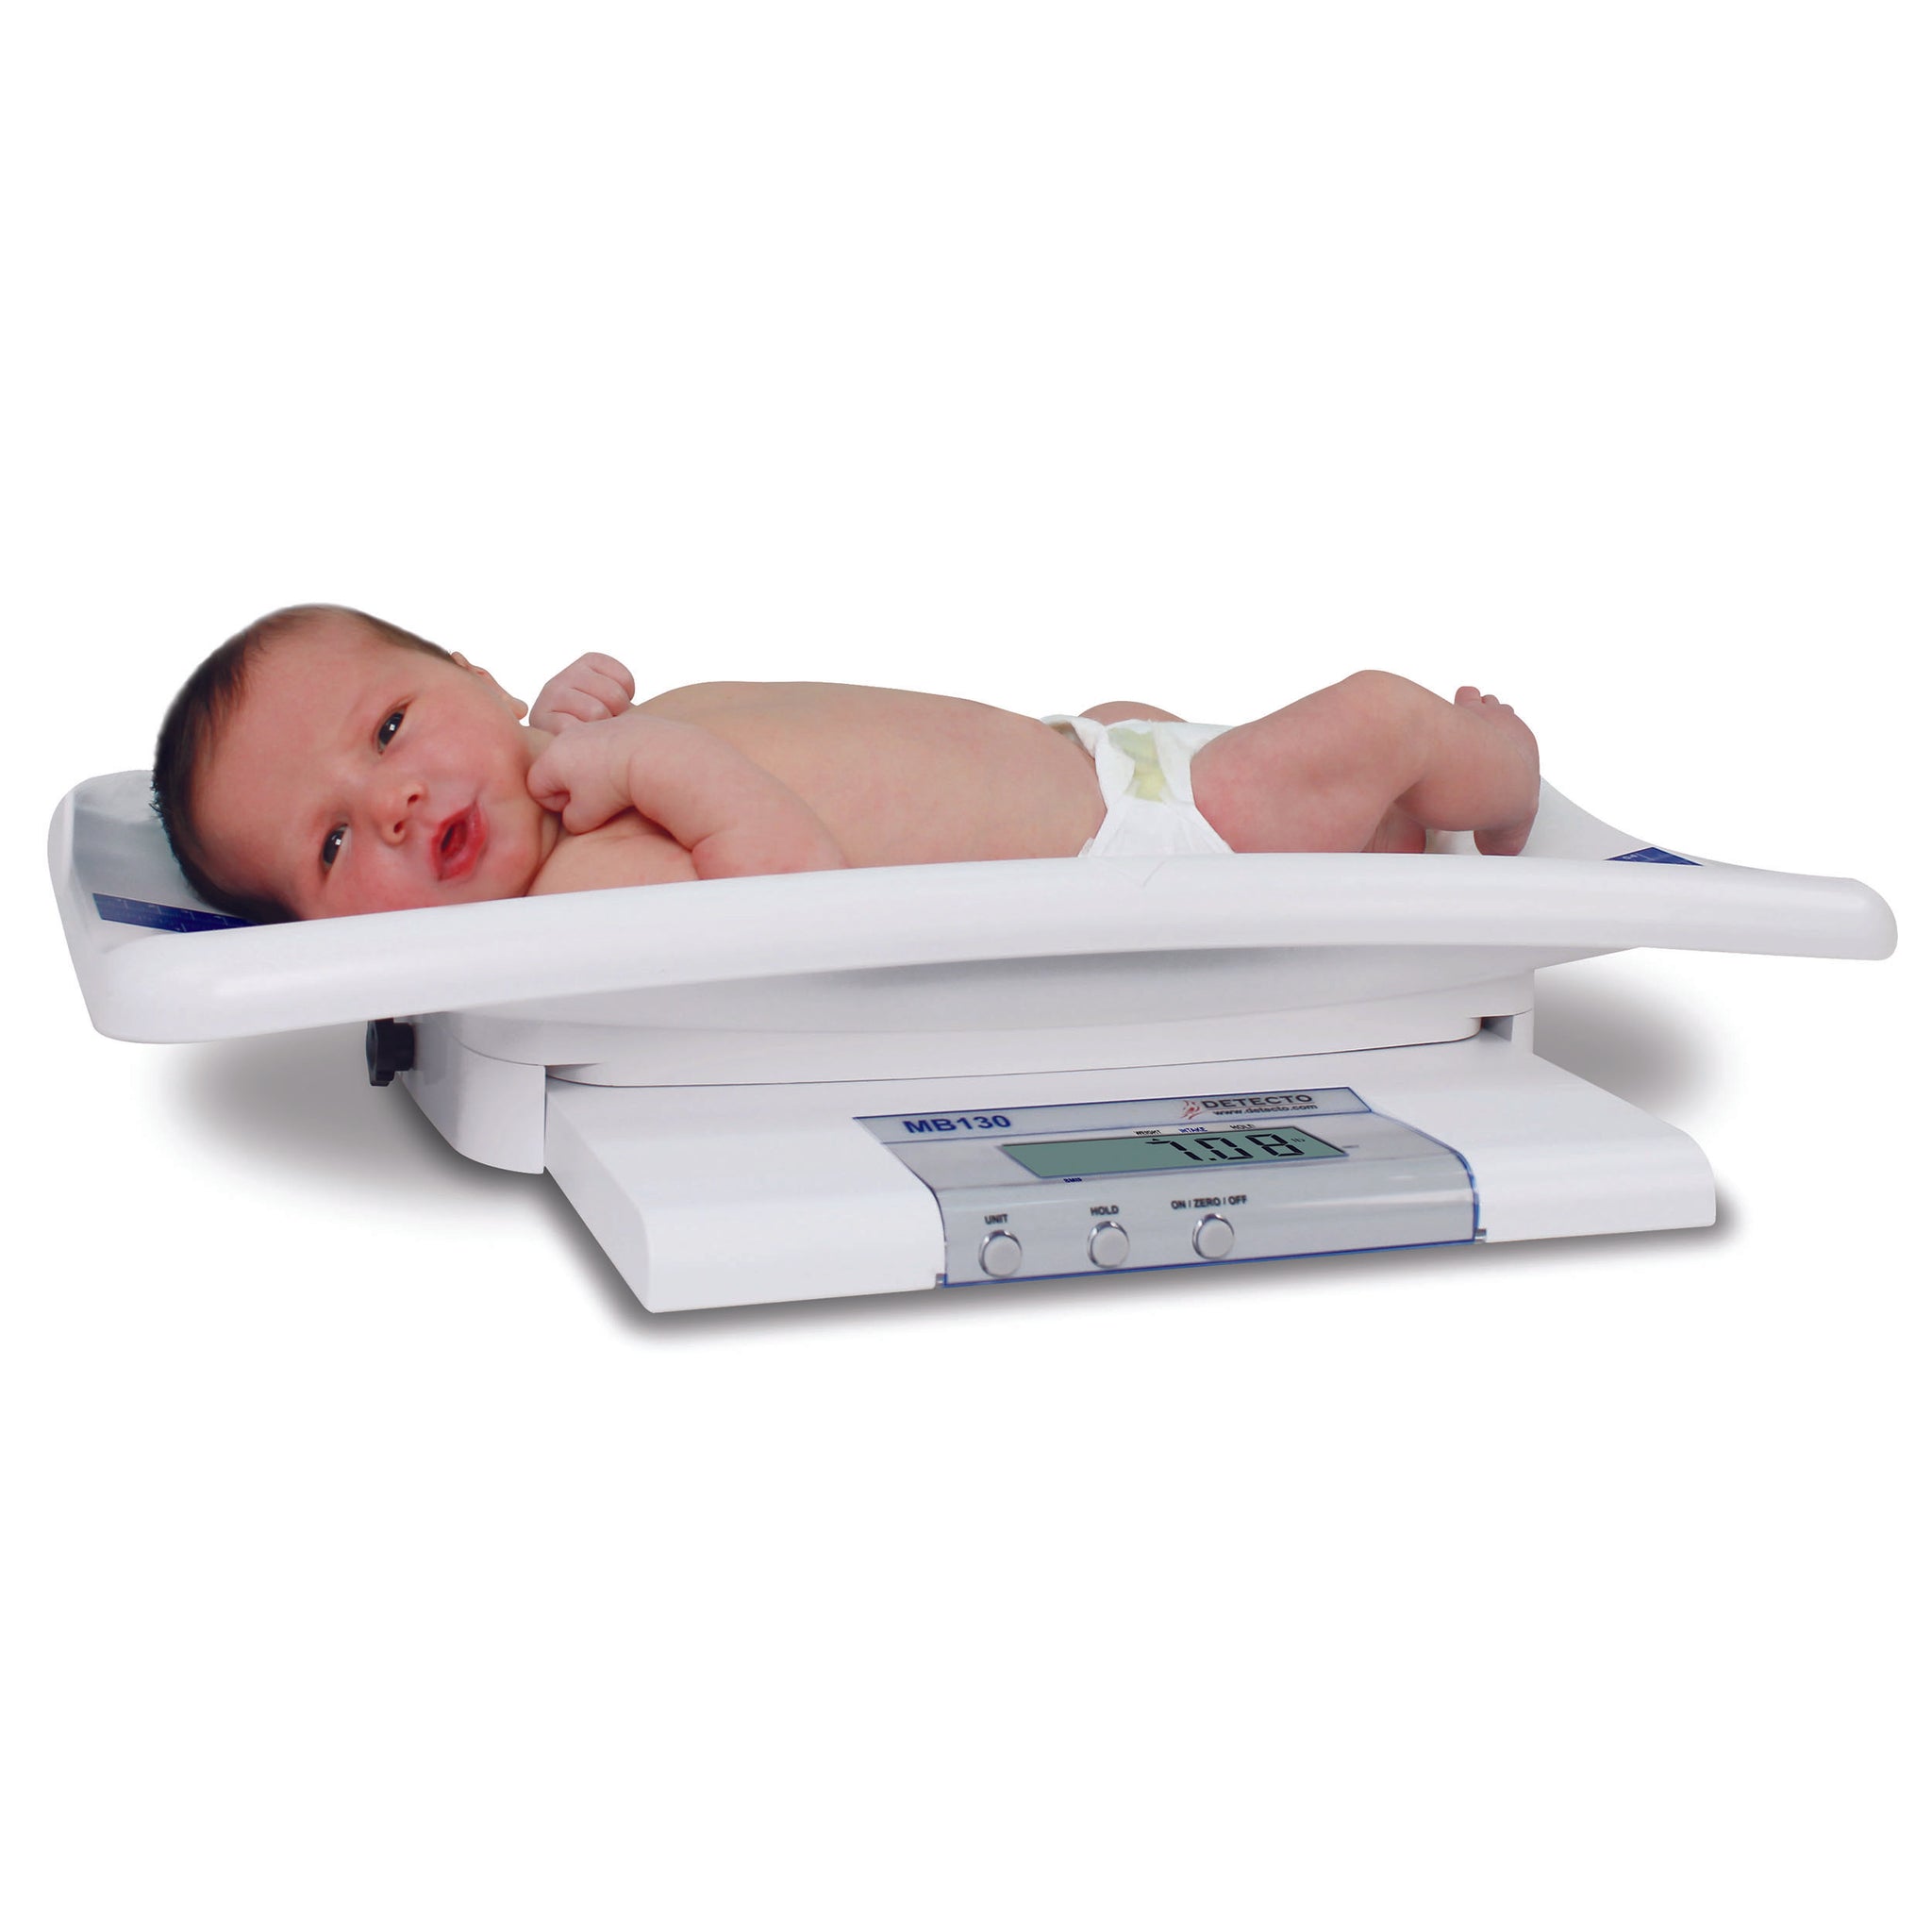 MB130 Digital Pediatric Scale Extra-Large Weighing Tray